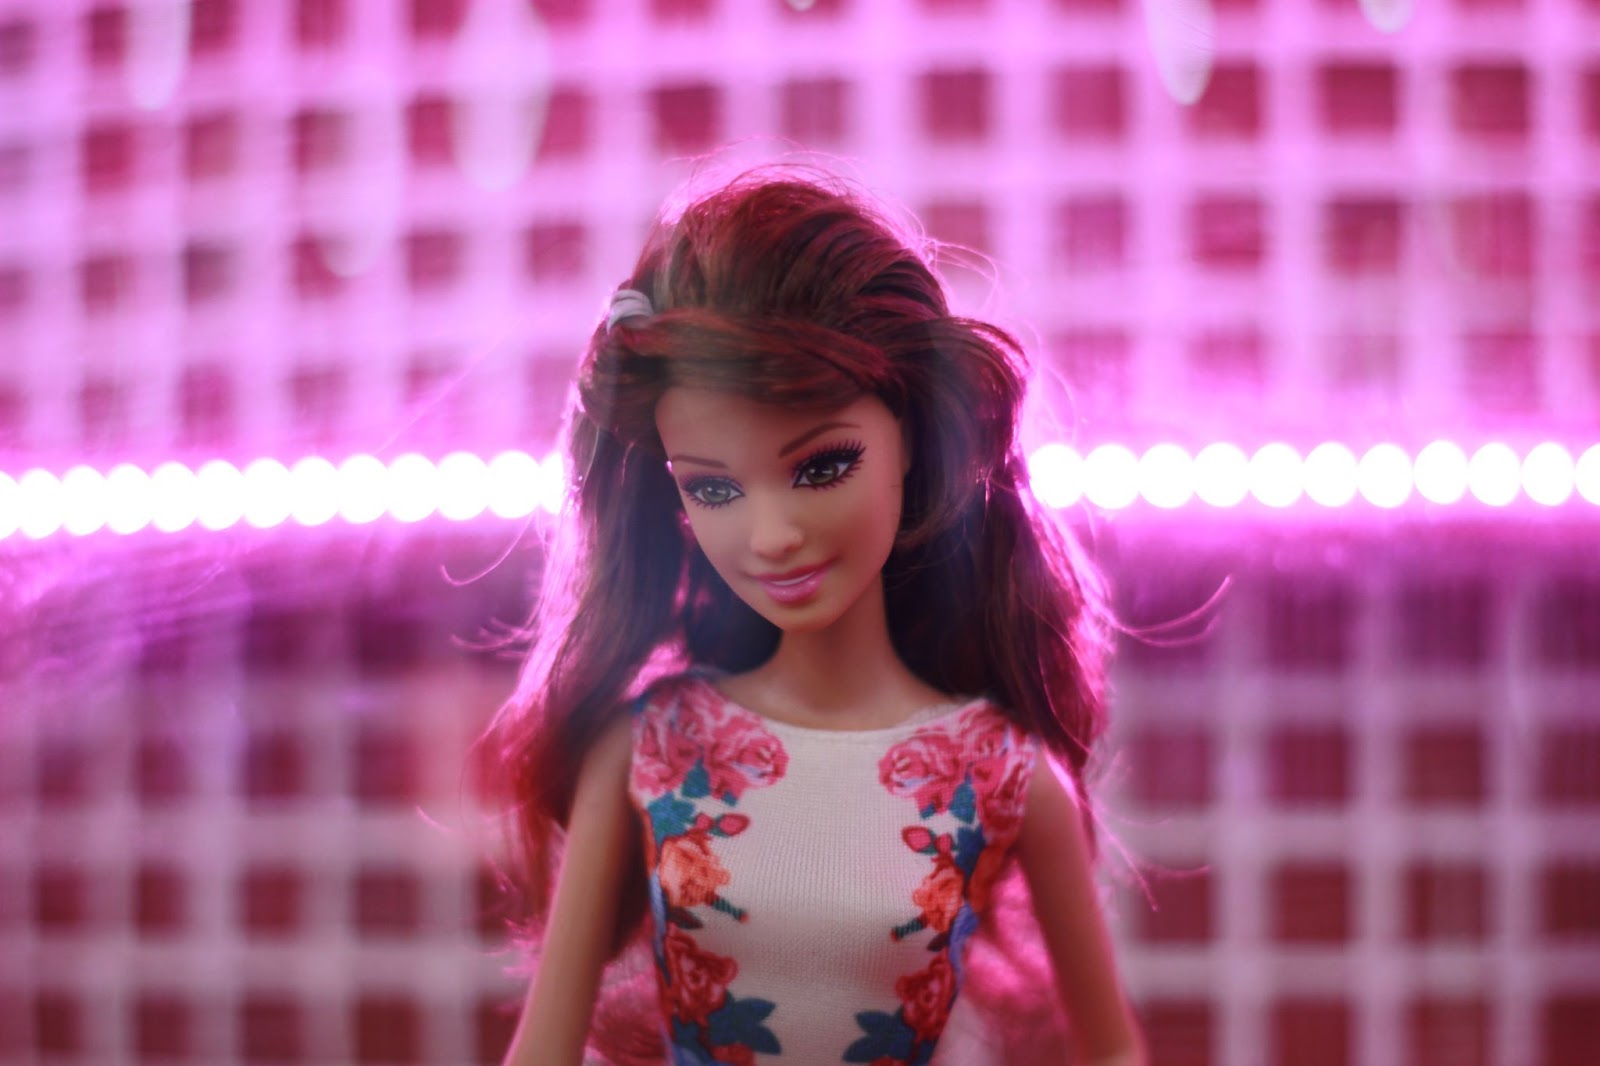 40 Quotes From Barbie That Promote Self